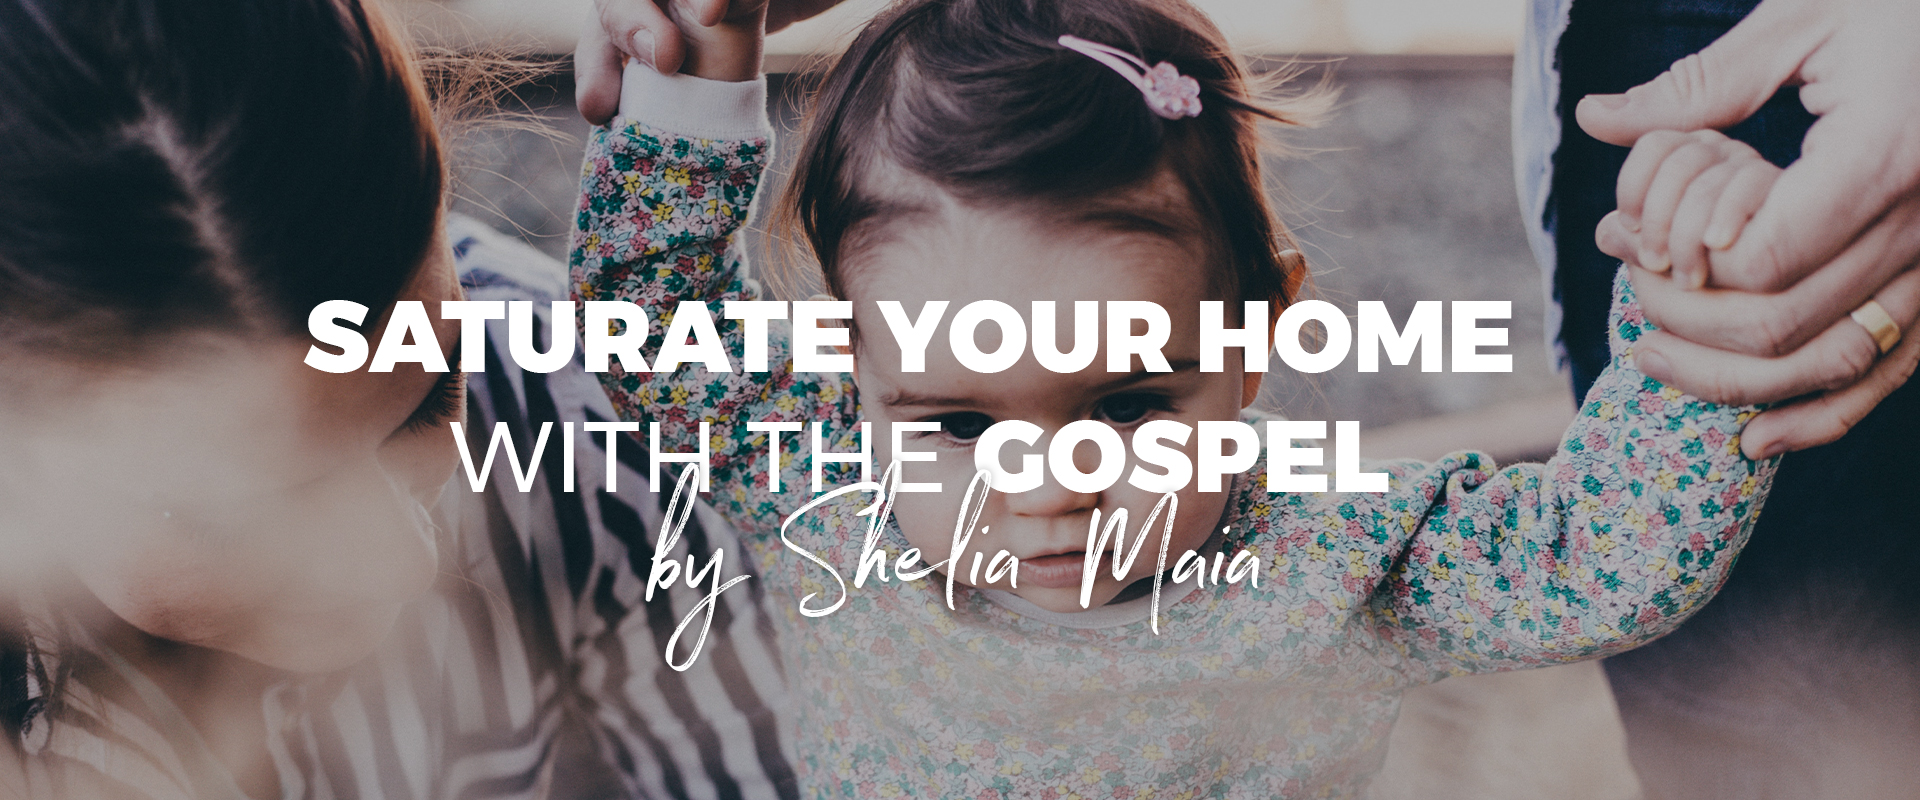 Saturate your Home with the Gospel